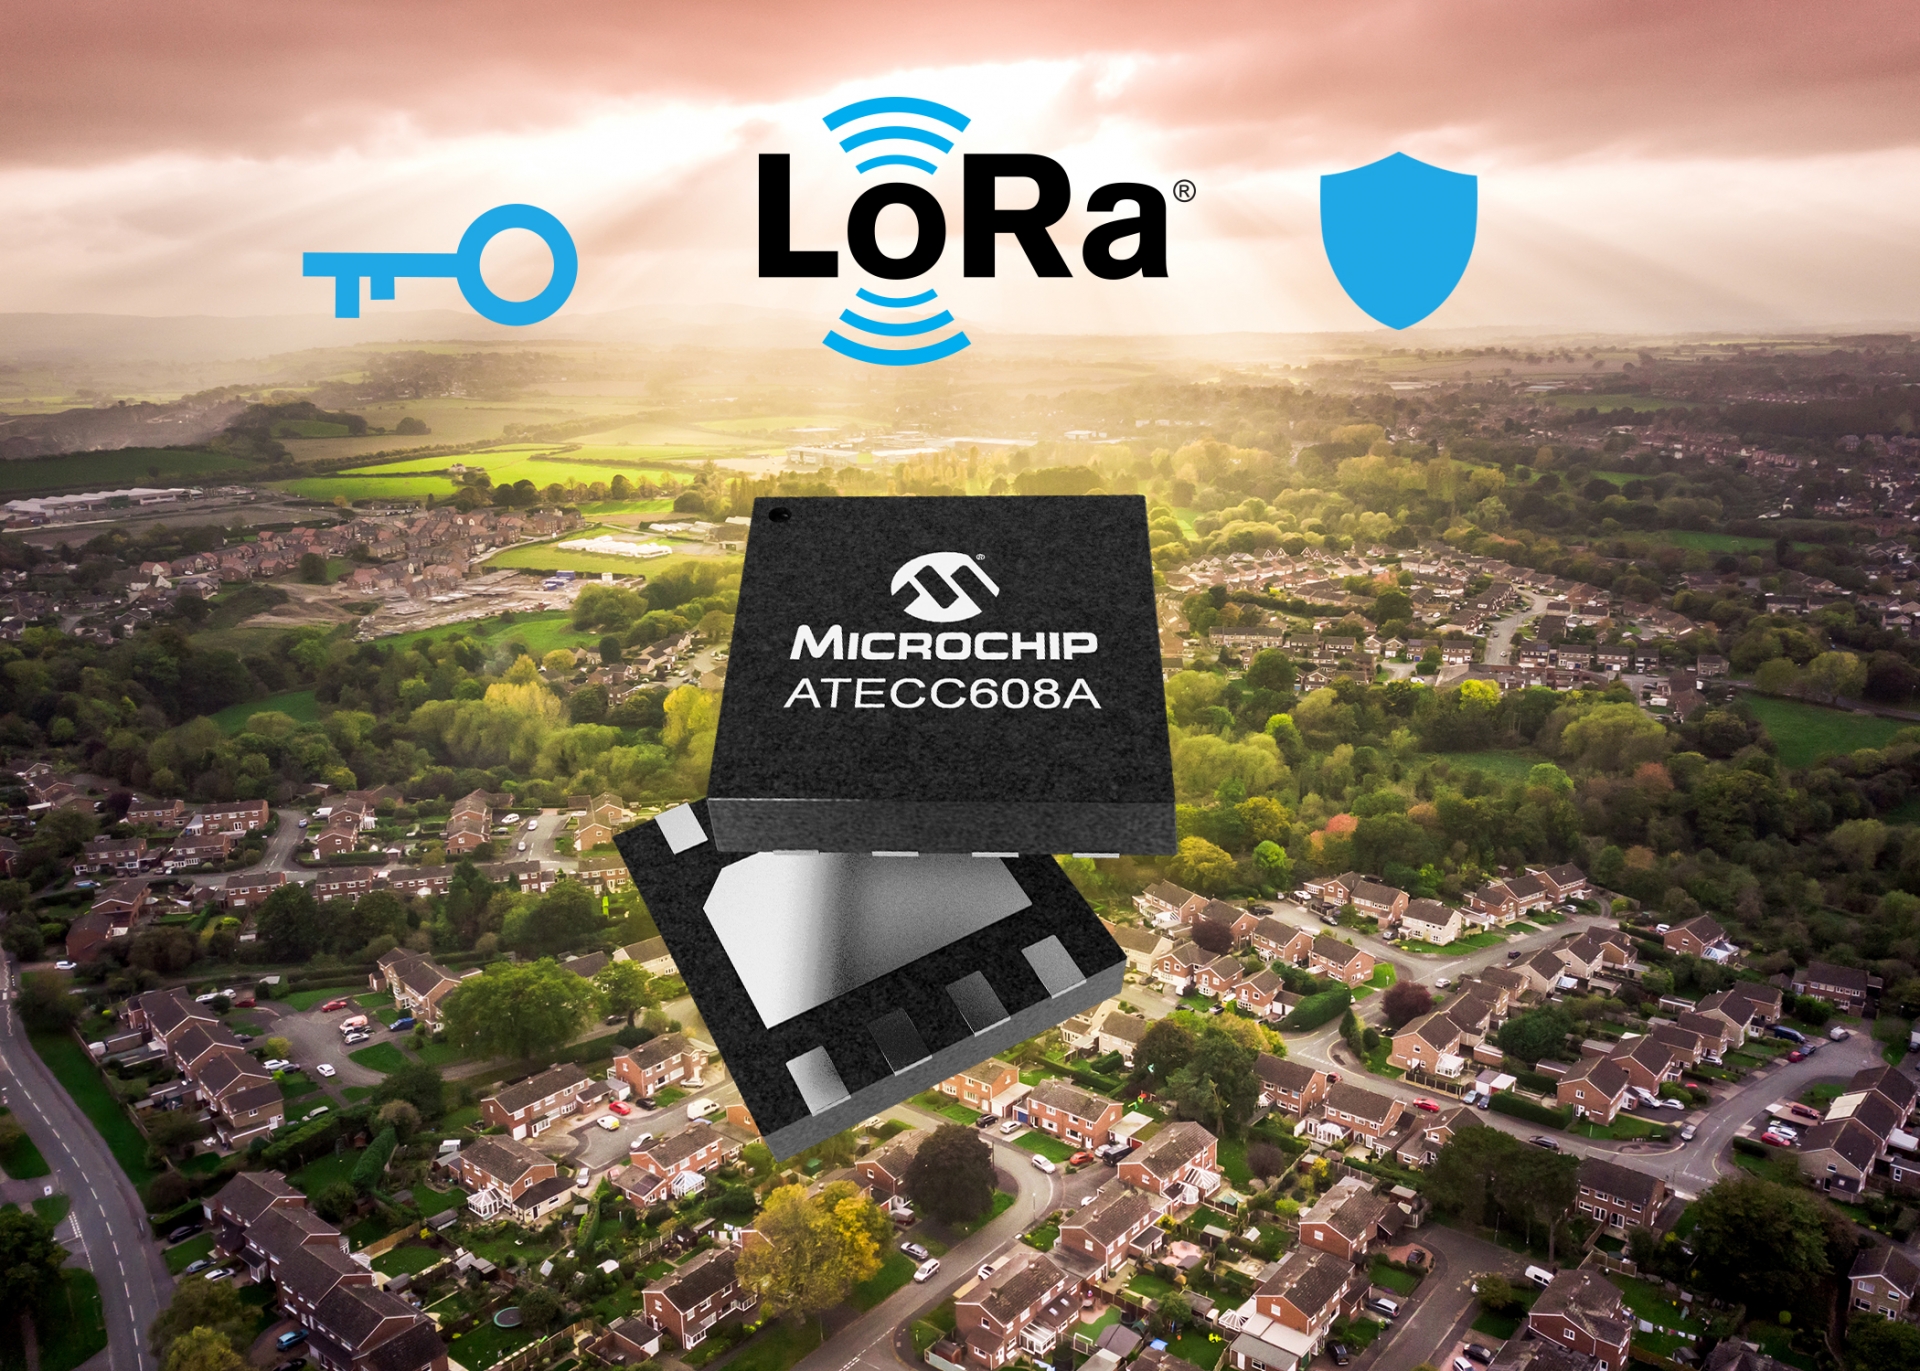 Industry-first end-to-end LoRa solution offers secure key provisioning